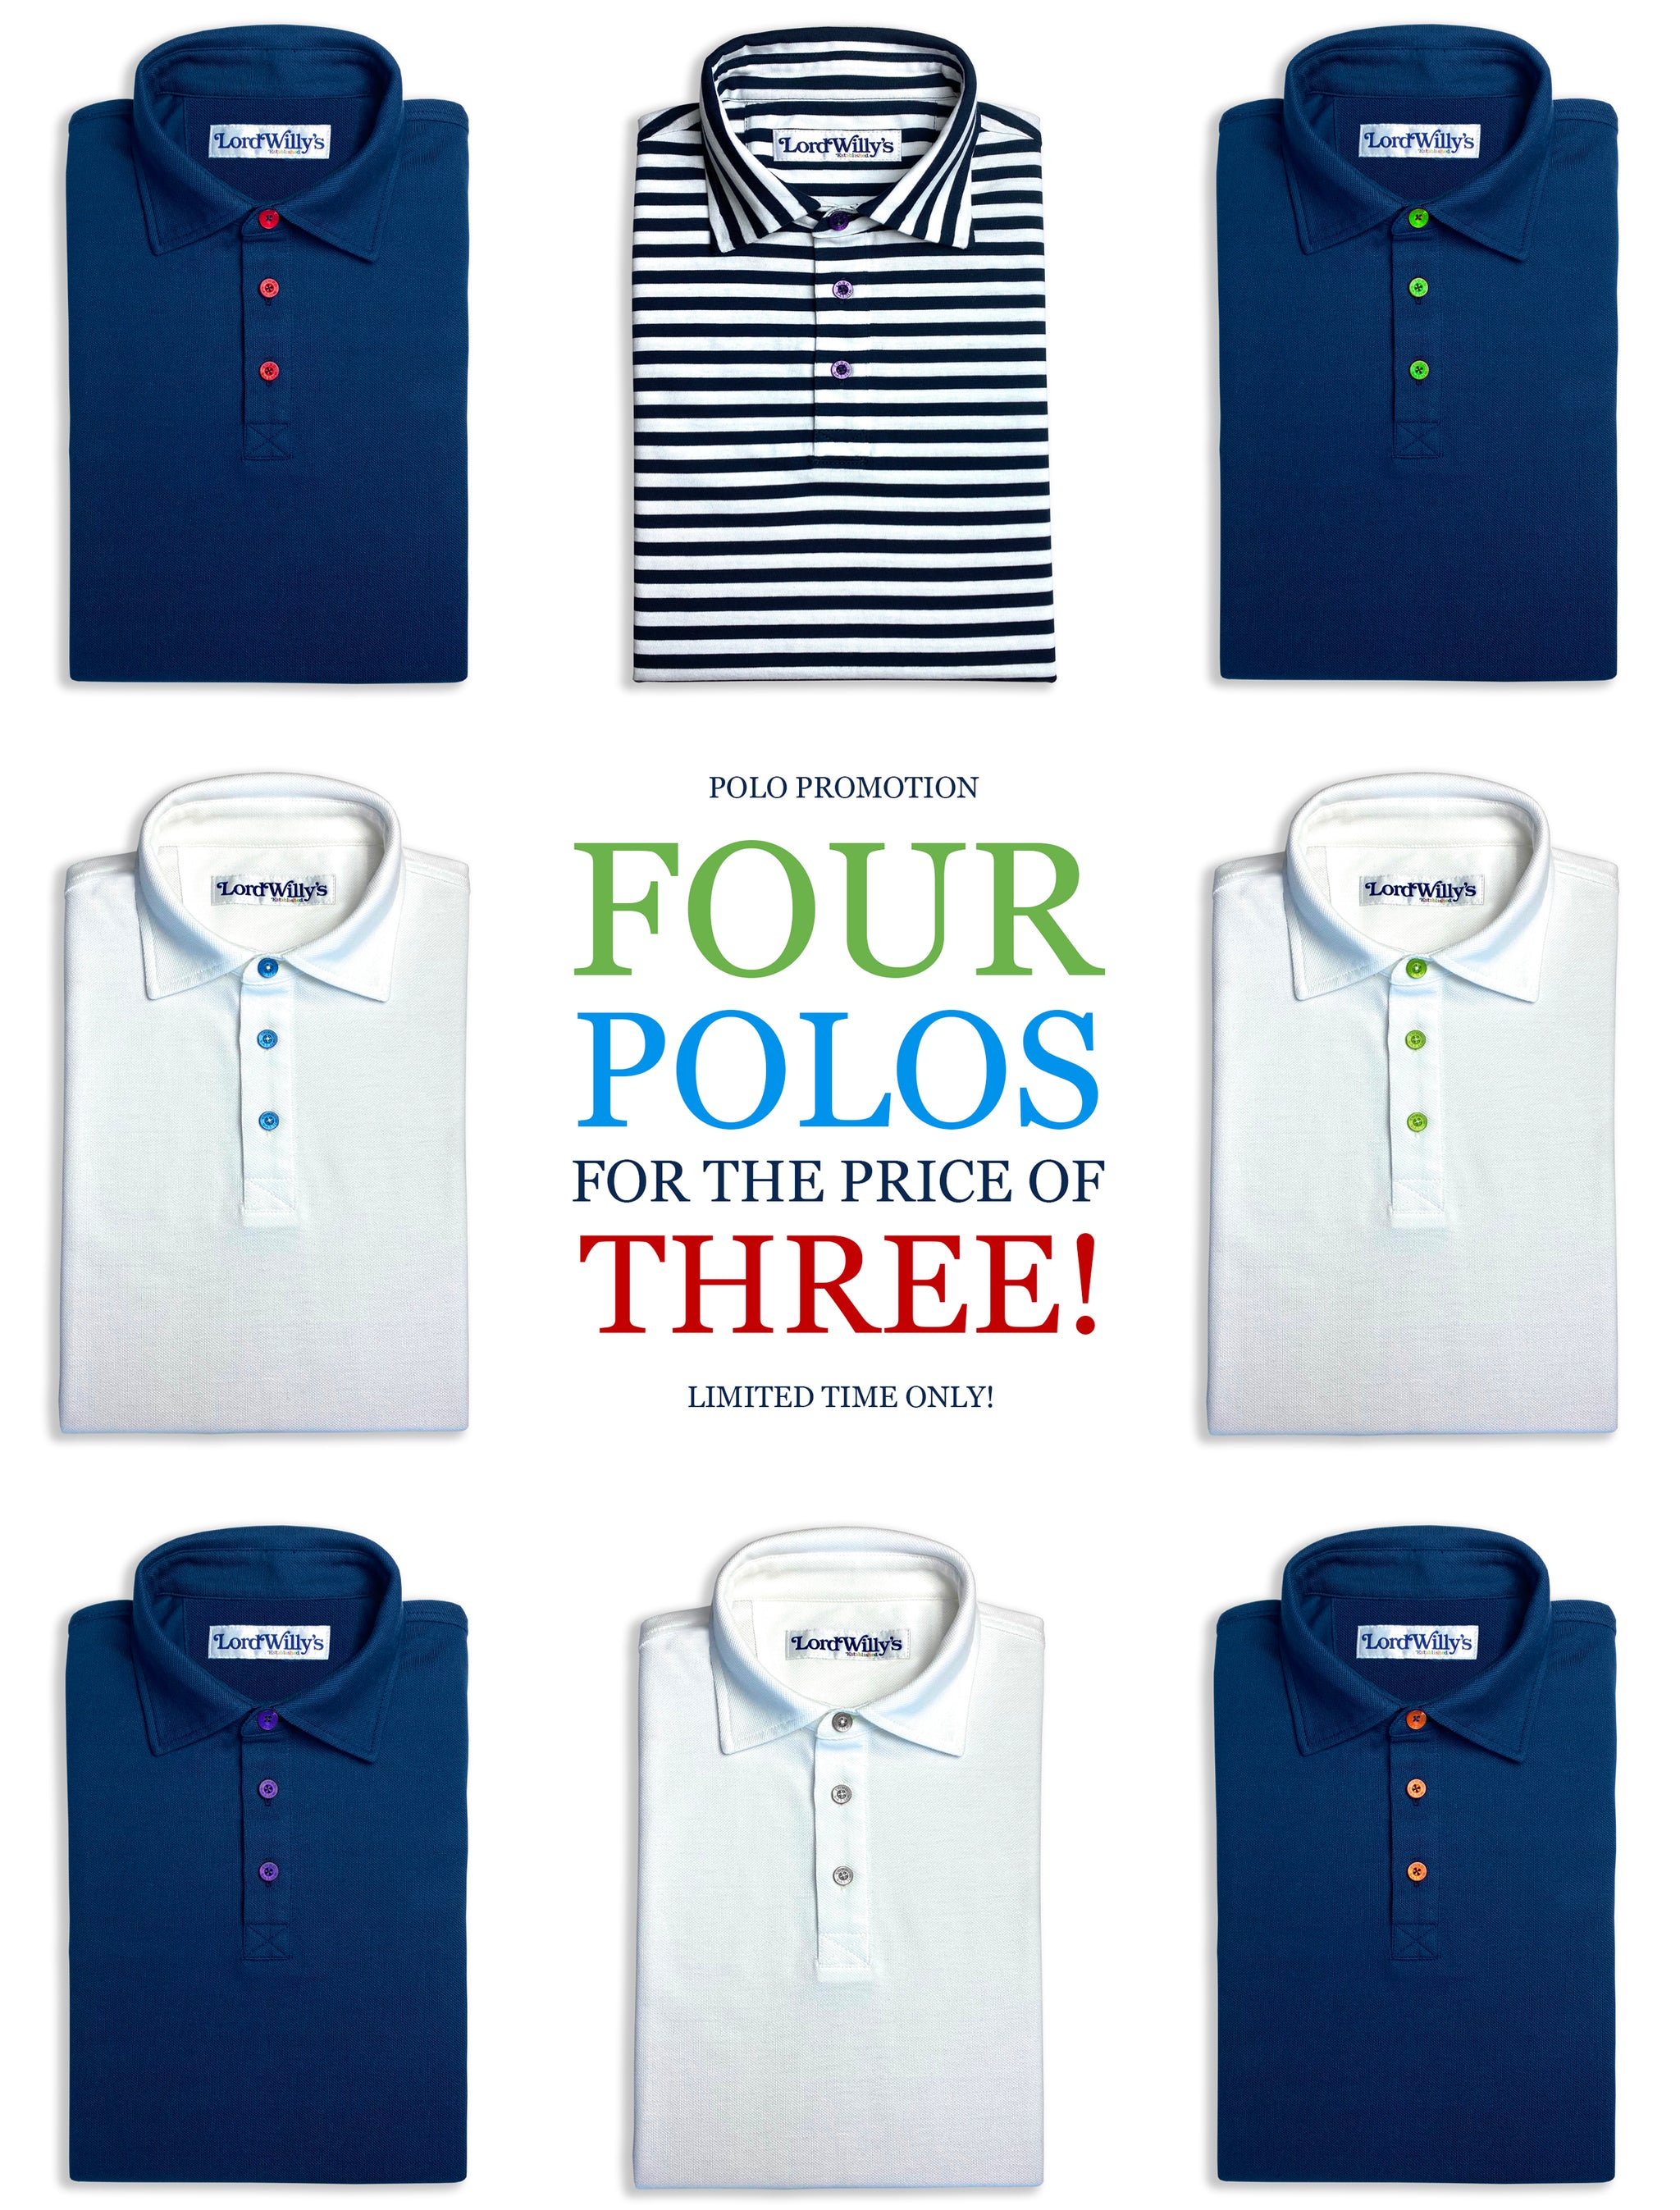 Polo Promotion. Four Polos for the price of three. Limited time only. Thanks!